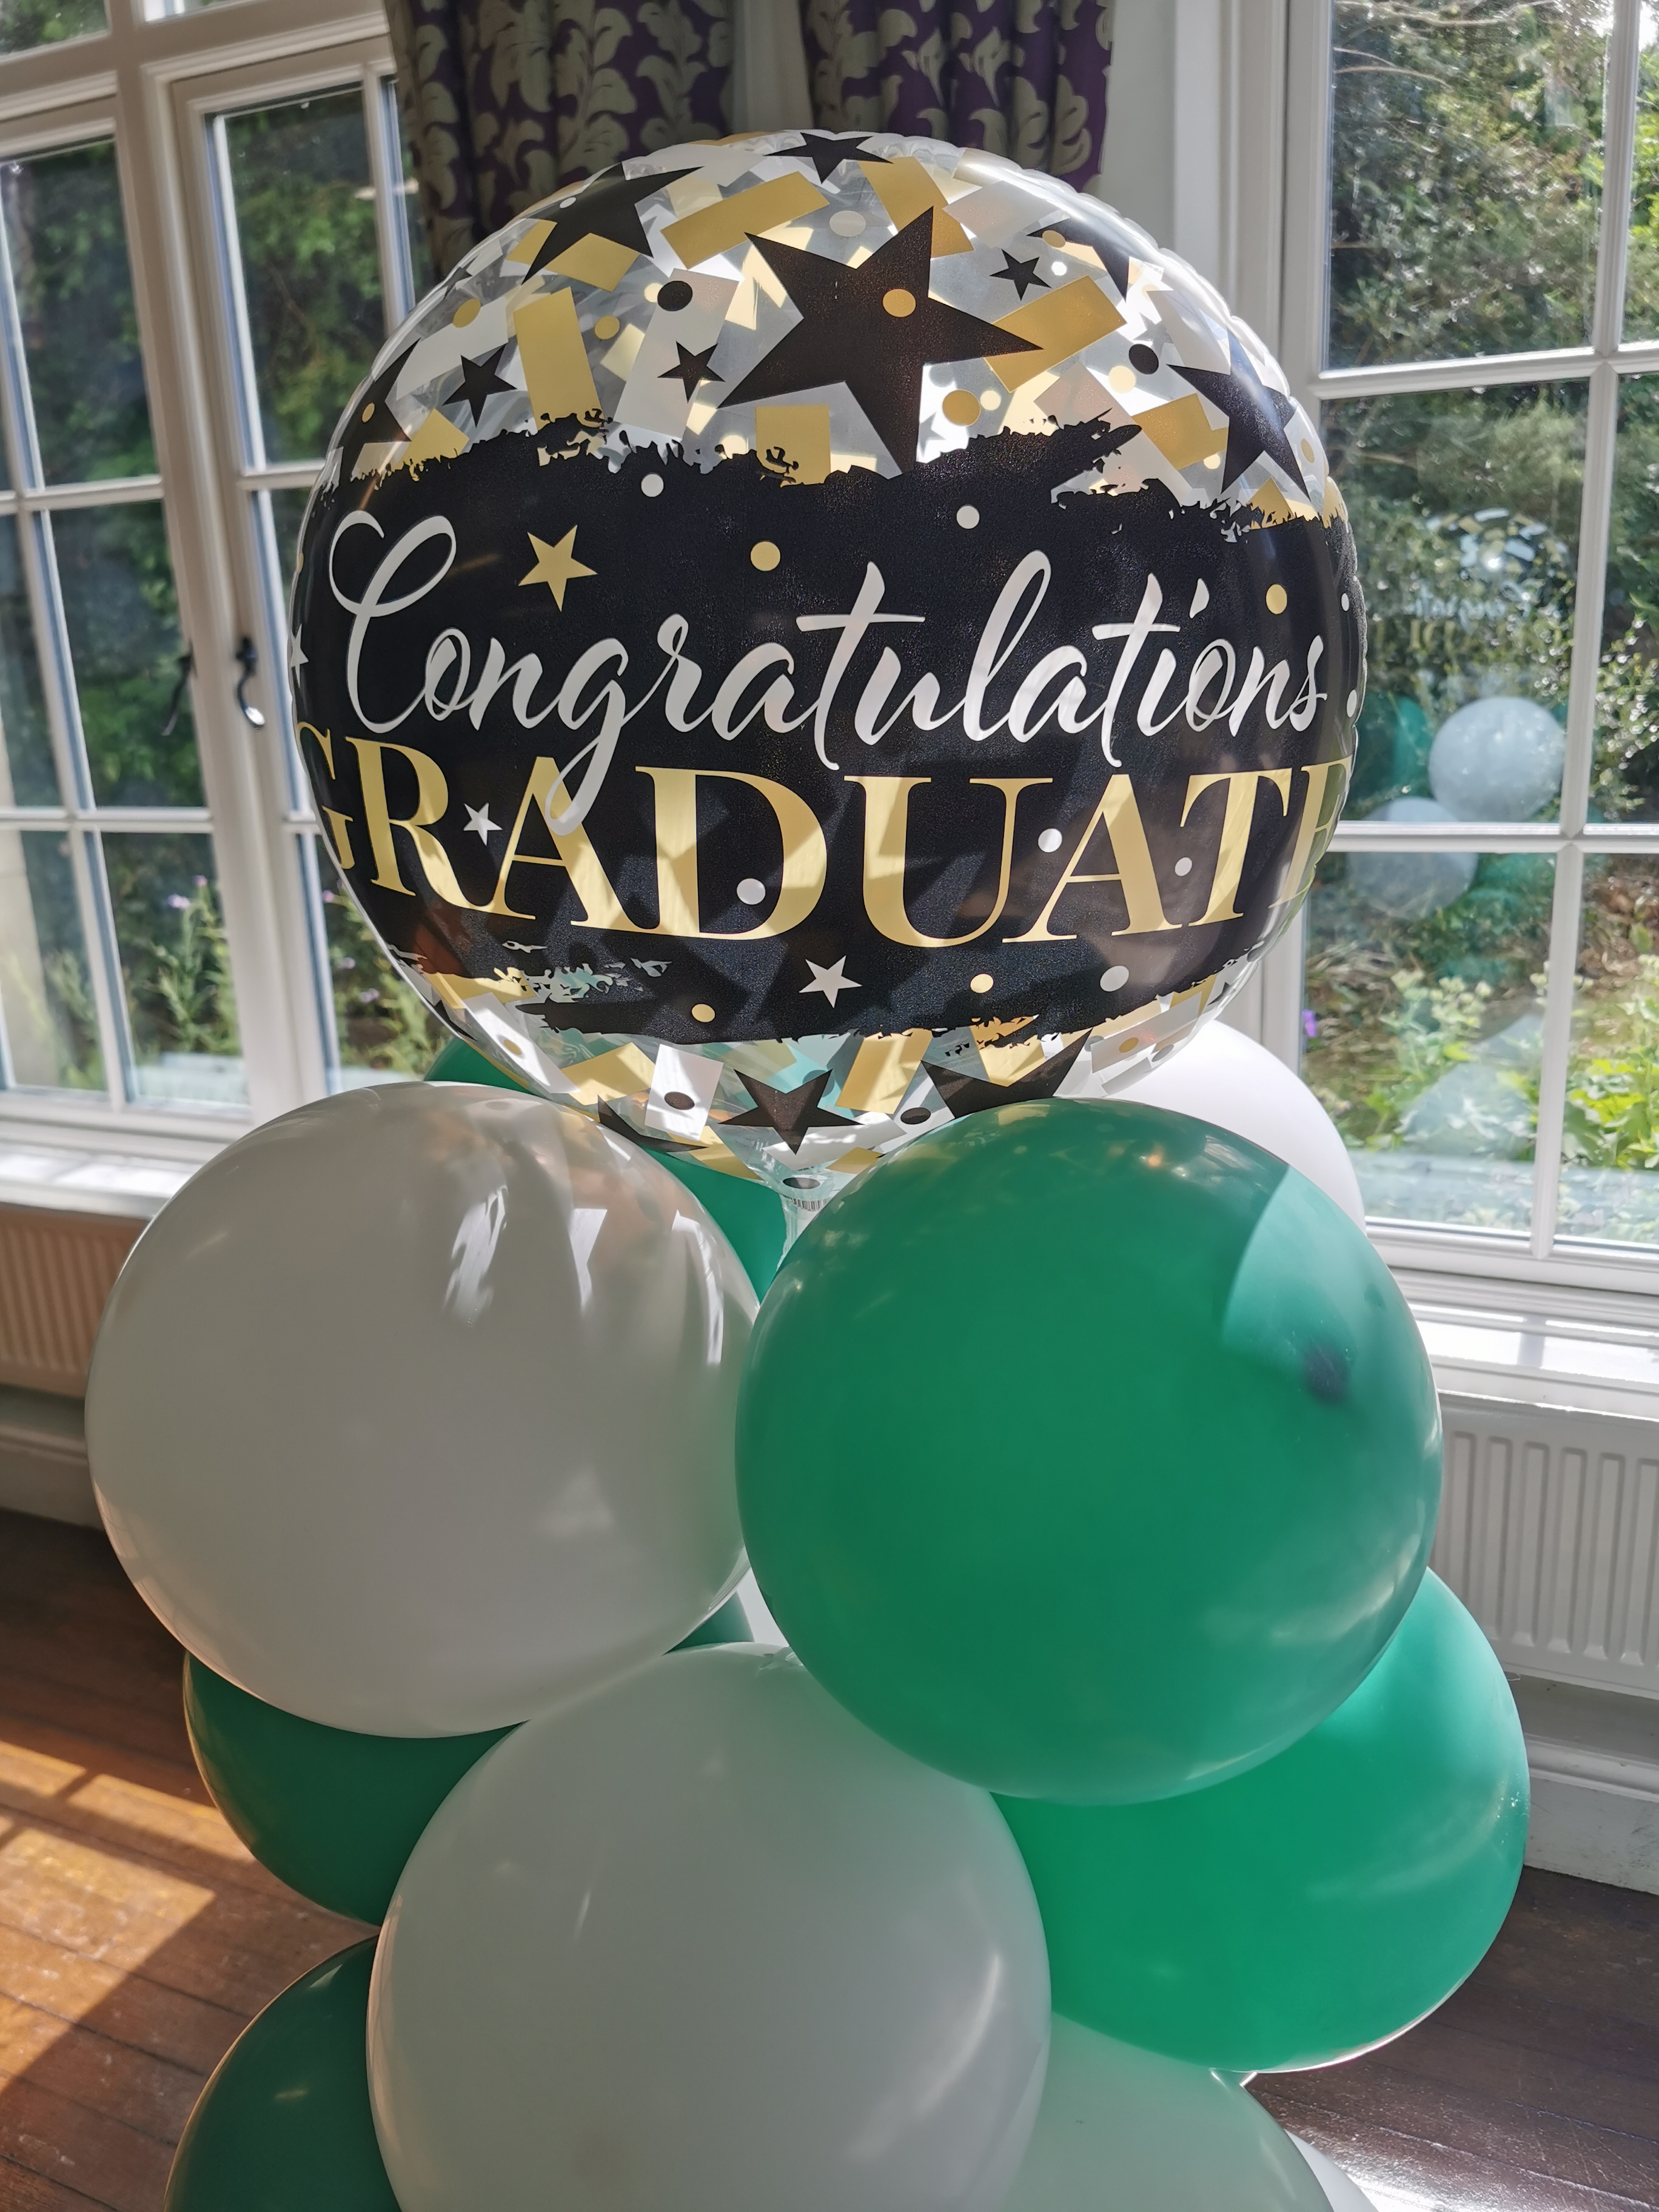 Congratulations Graduates balloons in green and white